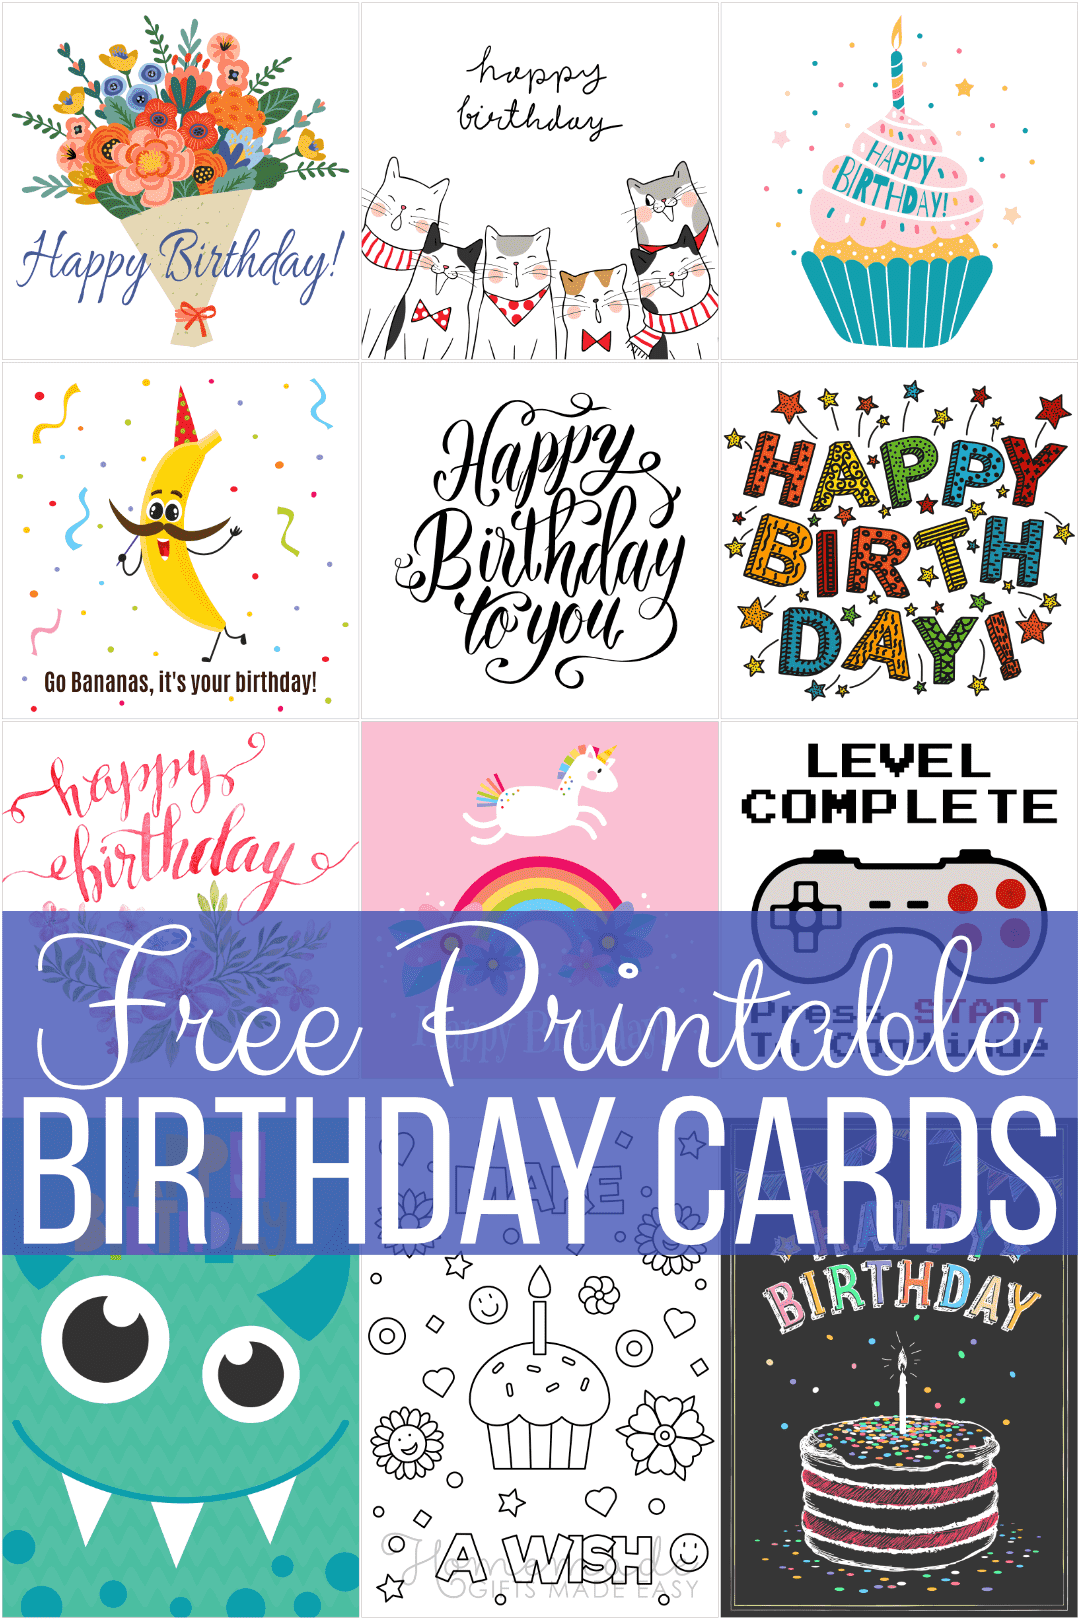 Free Printable Birthday Cards For Special Friends